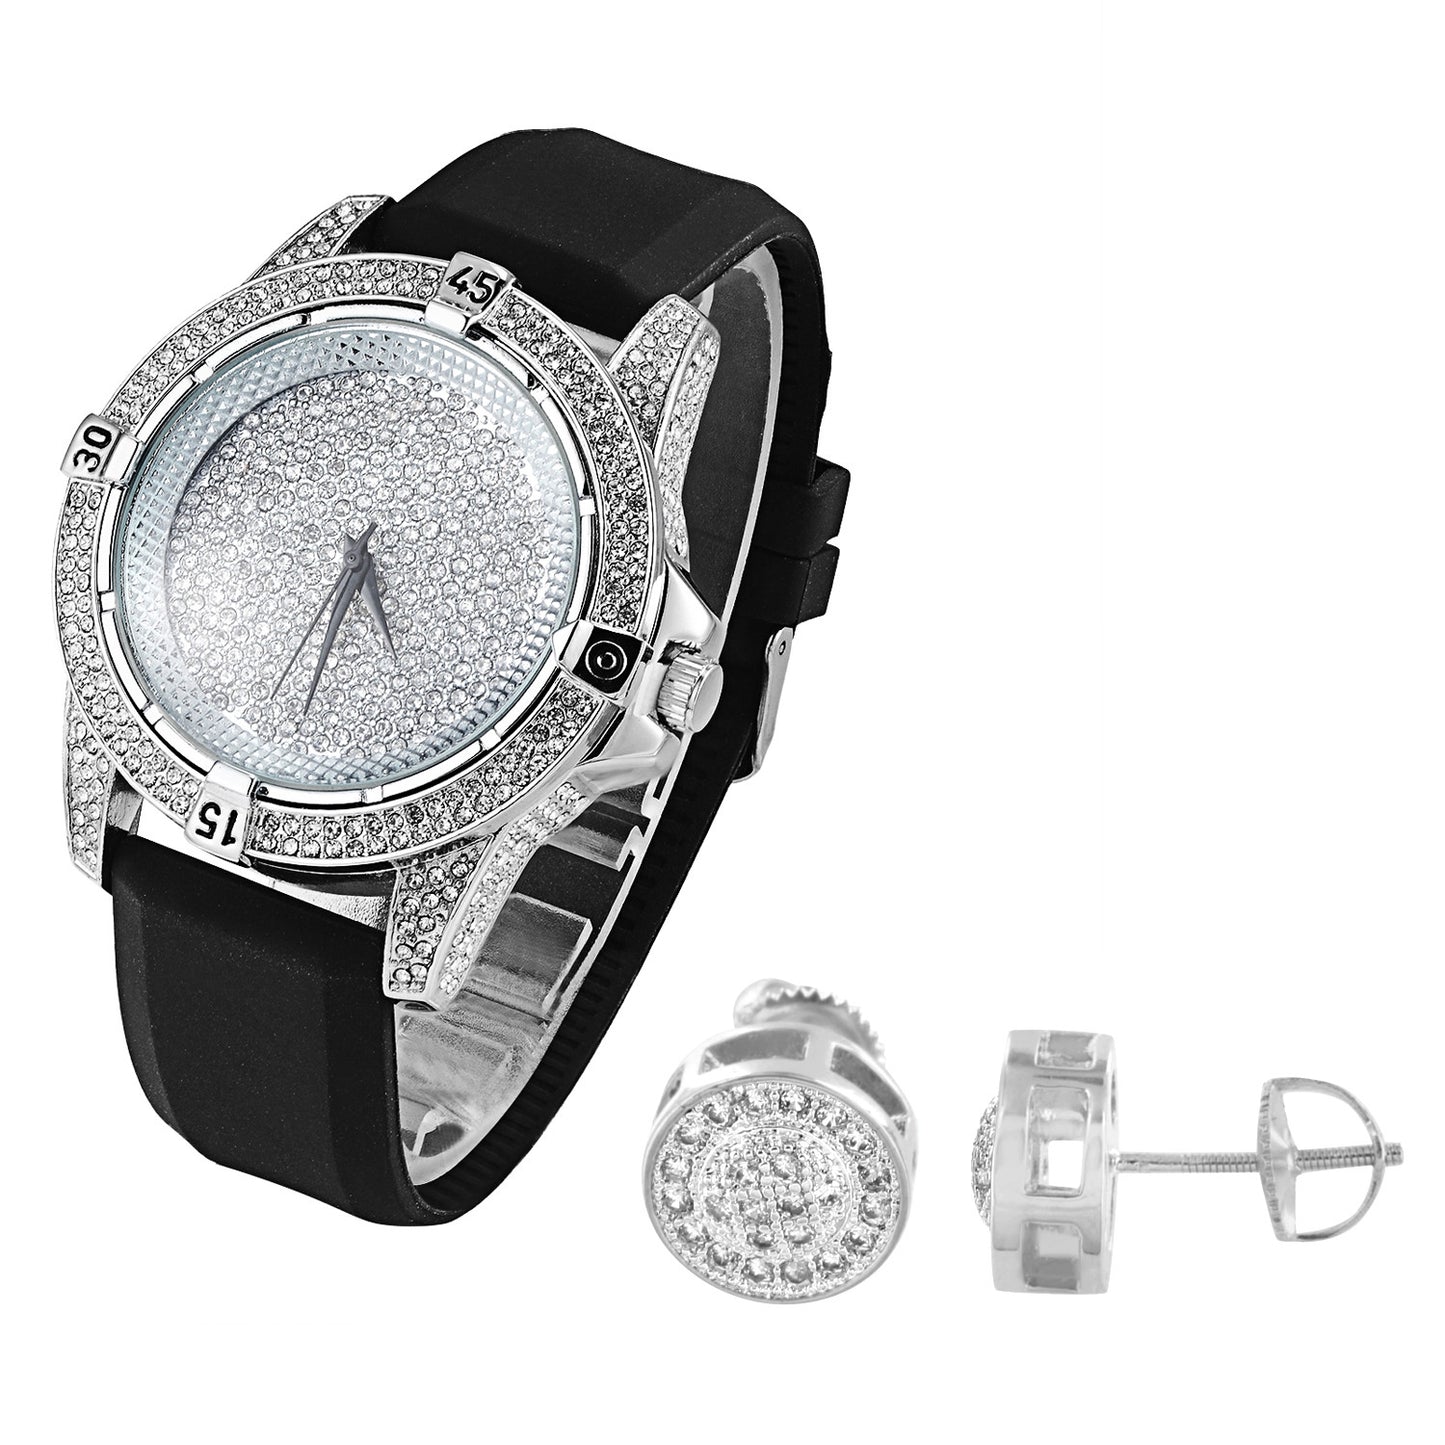 Techno Pave Men's White Gold Tone Watch With Matching Earrings Combo